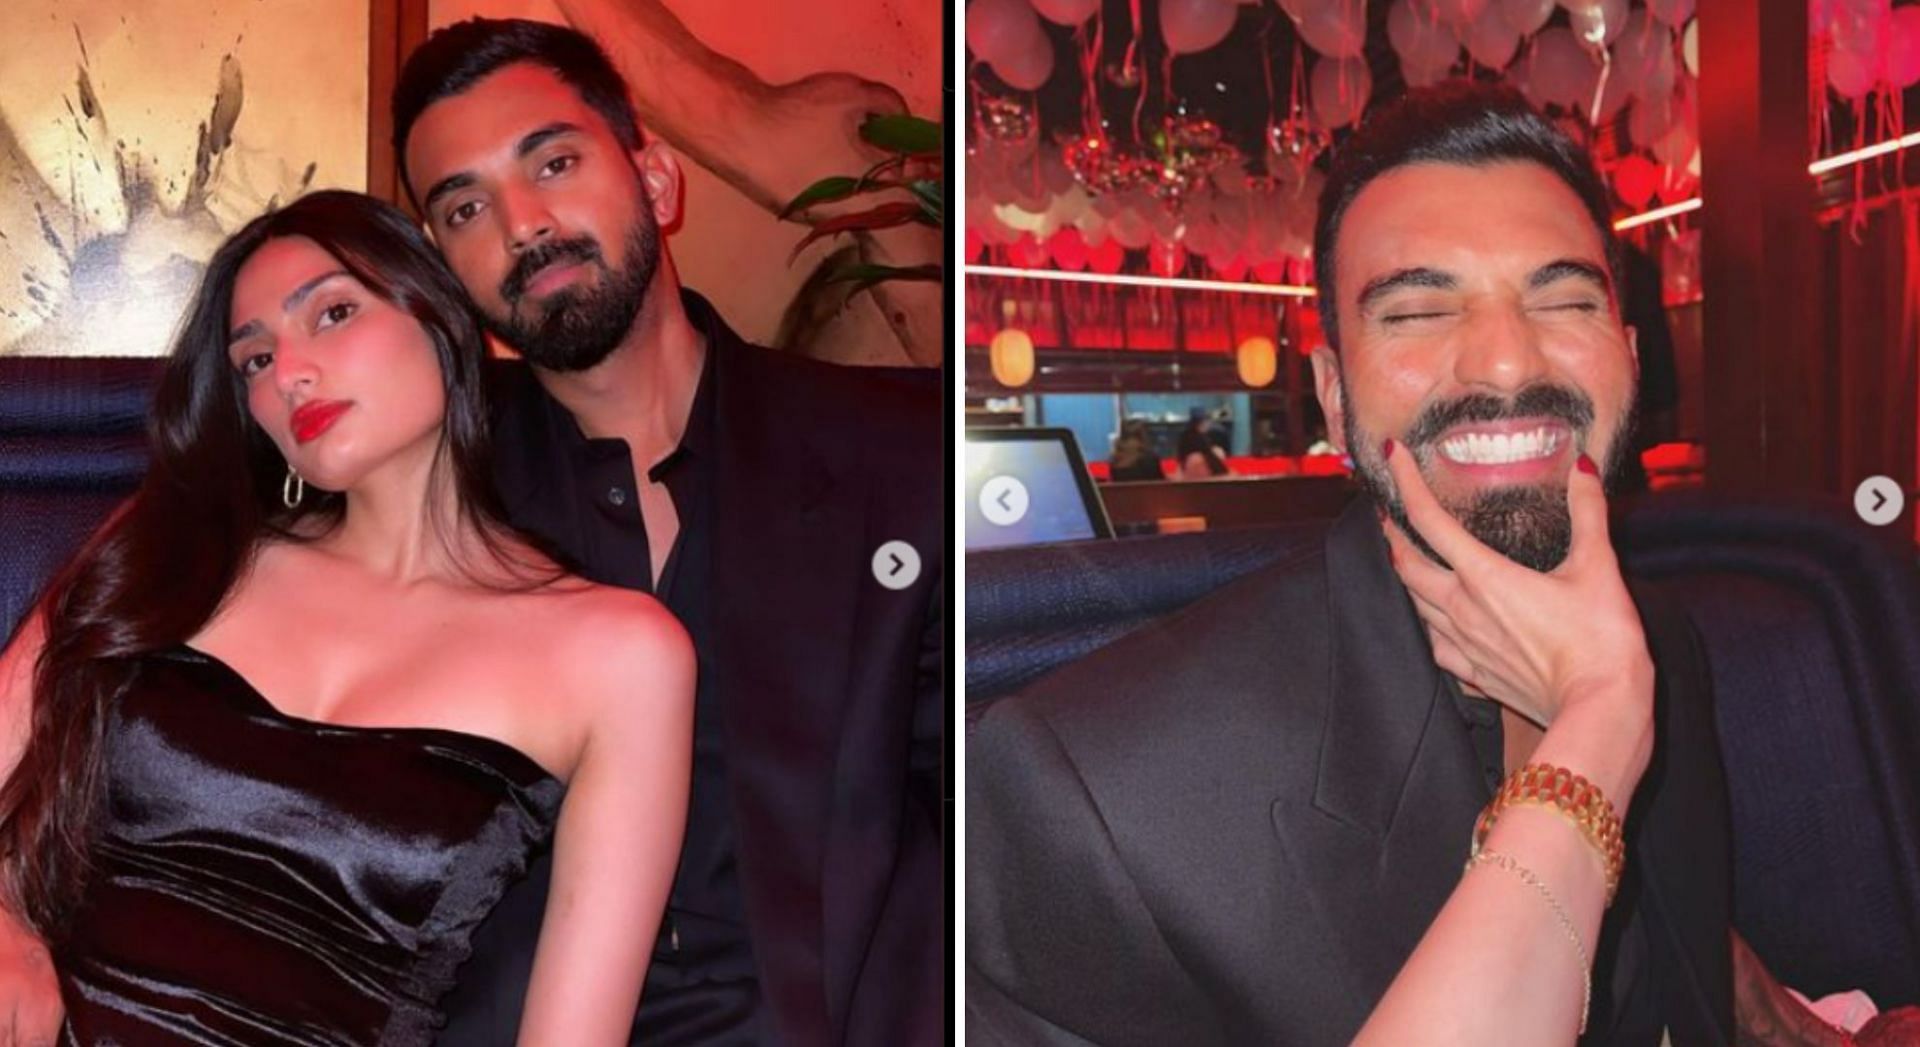 KL Rahul gets candid with girlfriend Athiya Shetty on New Year's Day, shares heartfelt pictures